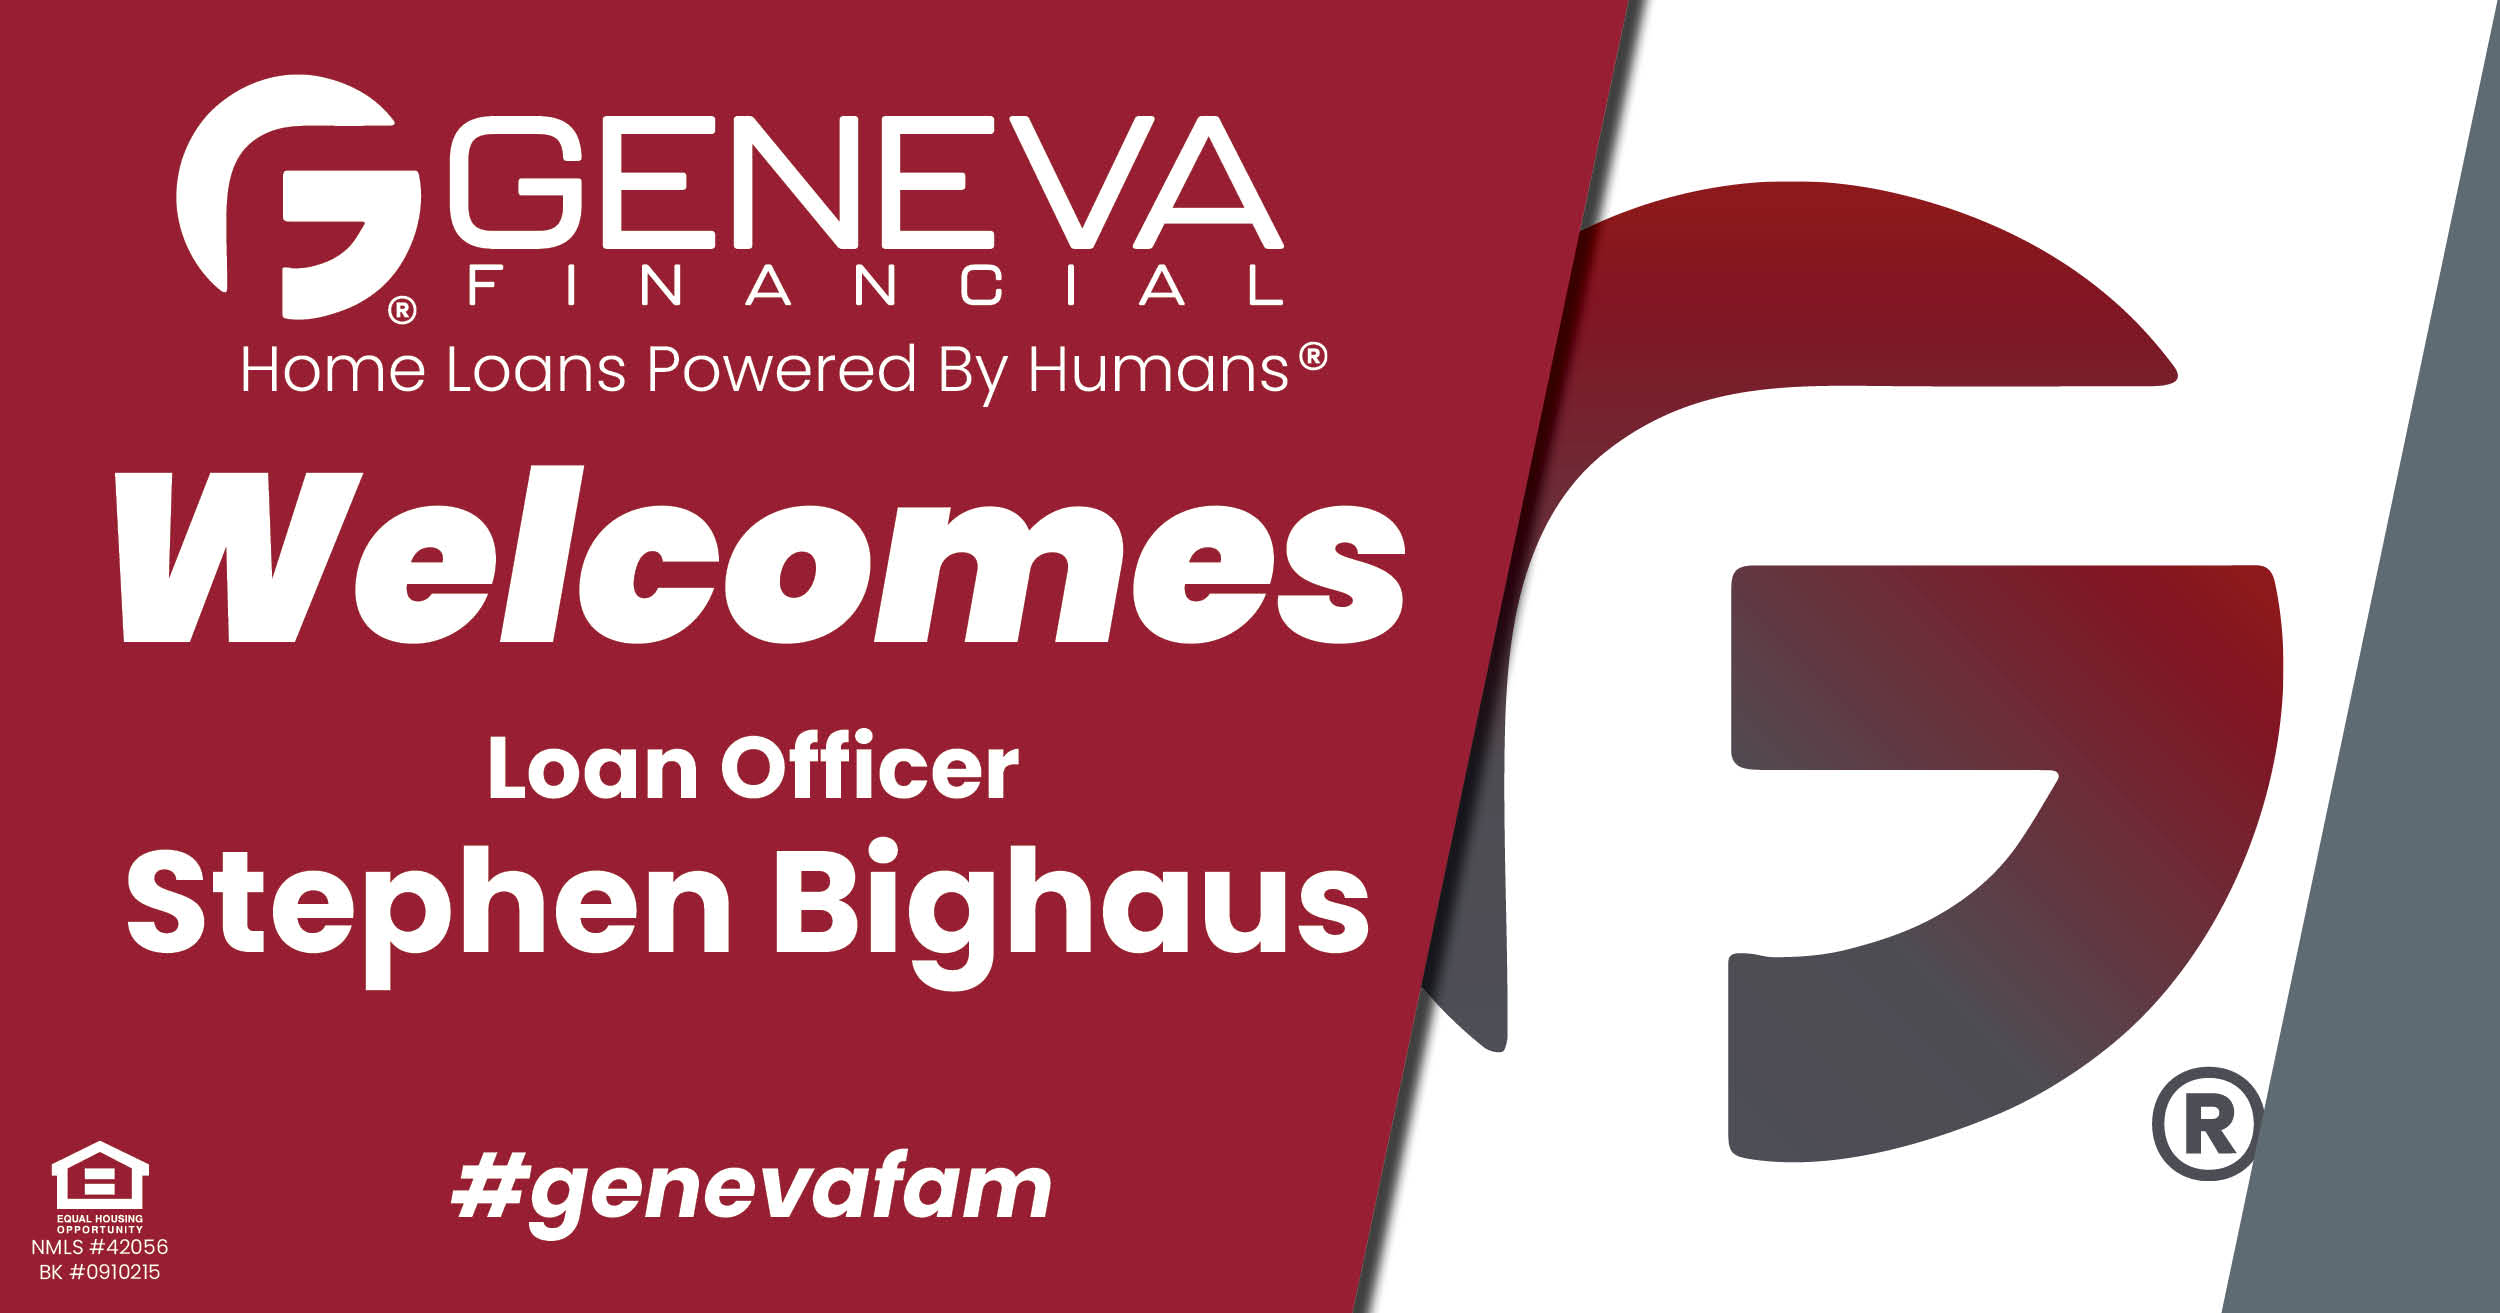 Geneva Financial Welcomes New Loan Officer Stephen Bighaus to Washington Market – Home Loans Powered by Humans®.